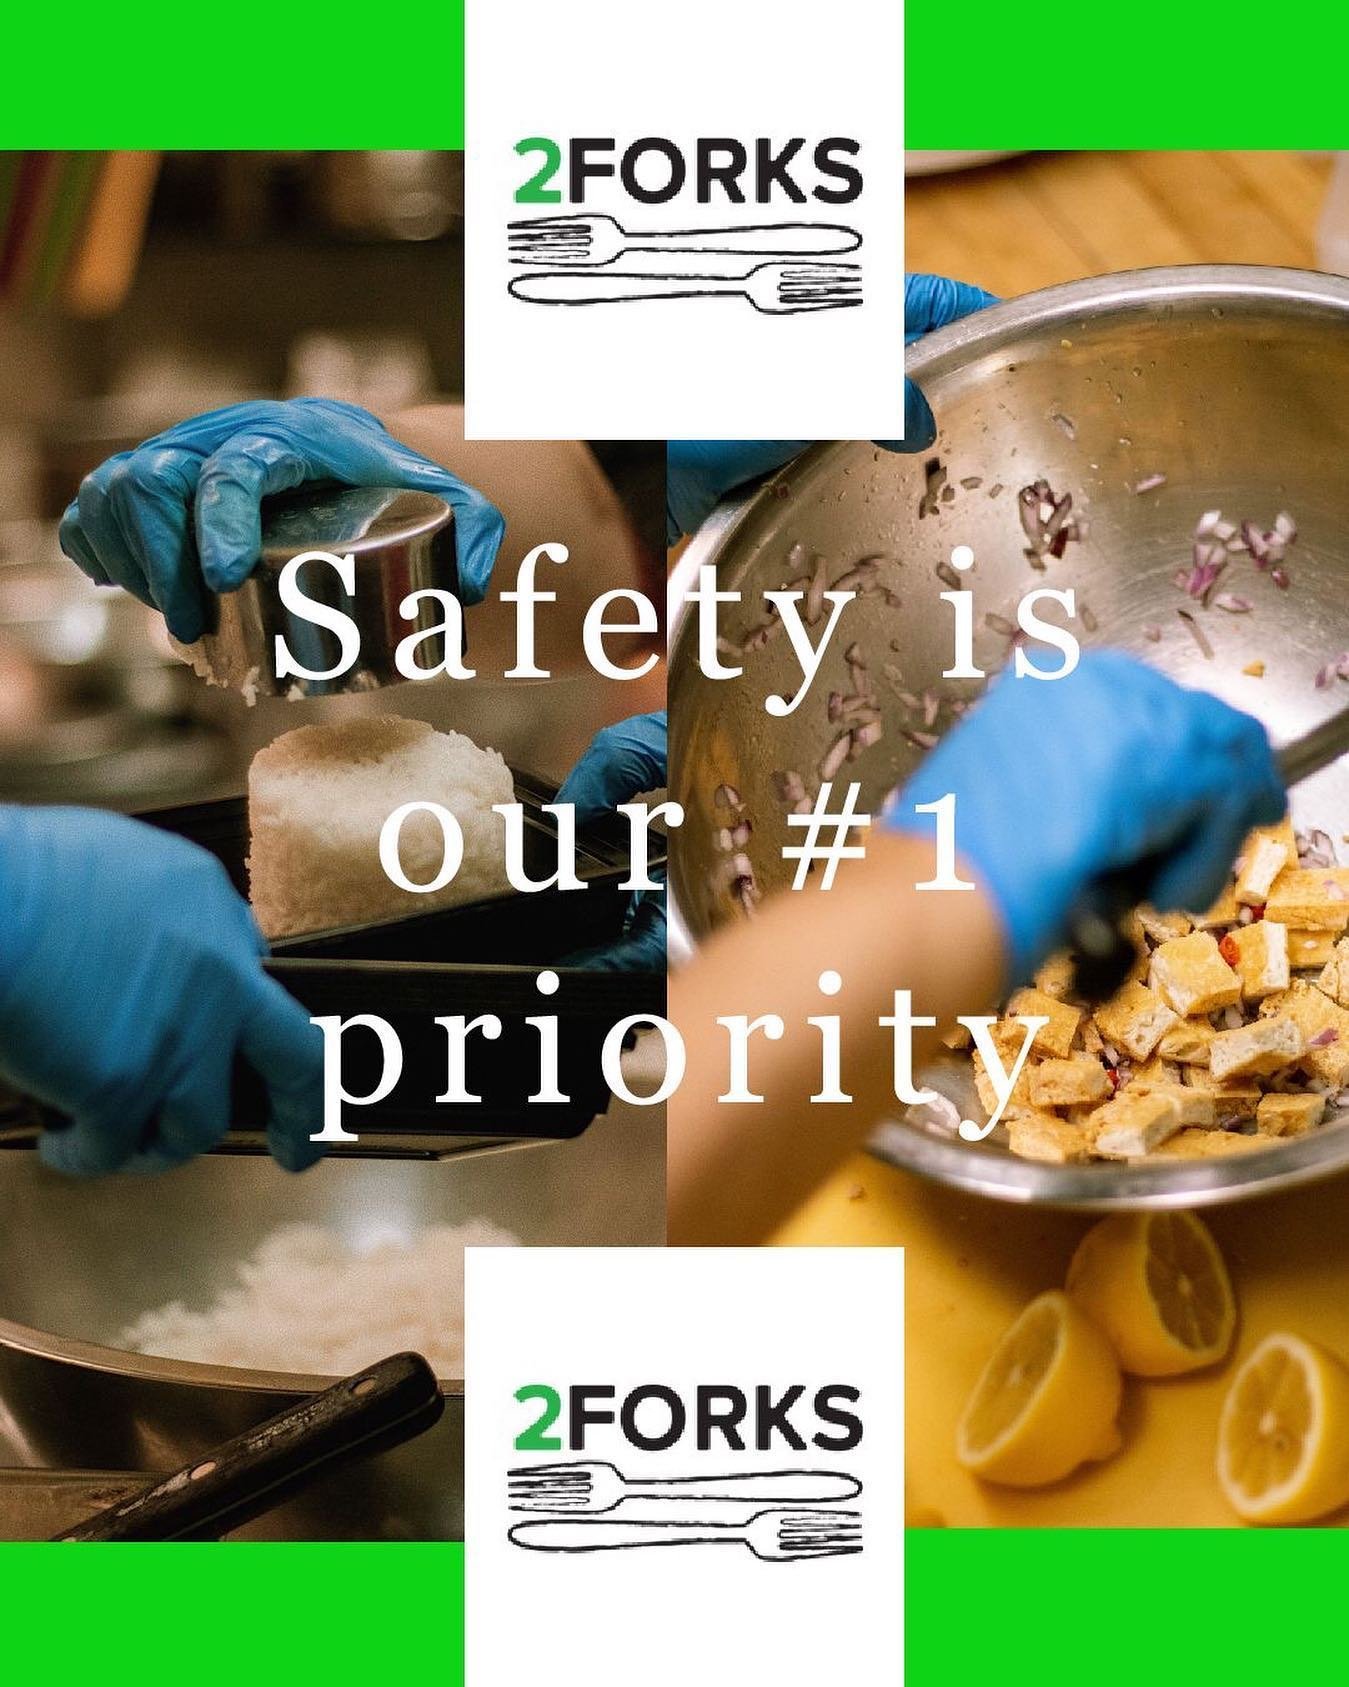 To give you guys some peace in mind, here at 2Forks, each and every delicious meal(s) are prepared and made safely from start upon pick-up! We stay safe (wear gloves and masks) for us and for you to provide quality meals in these trying times to our 